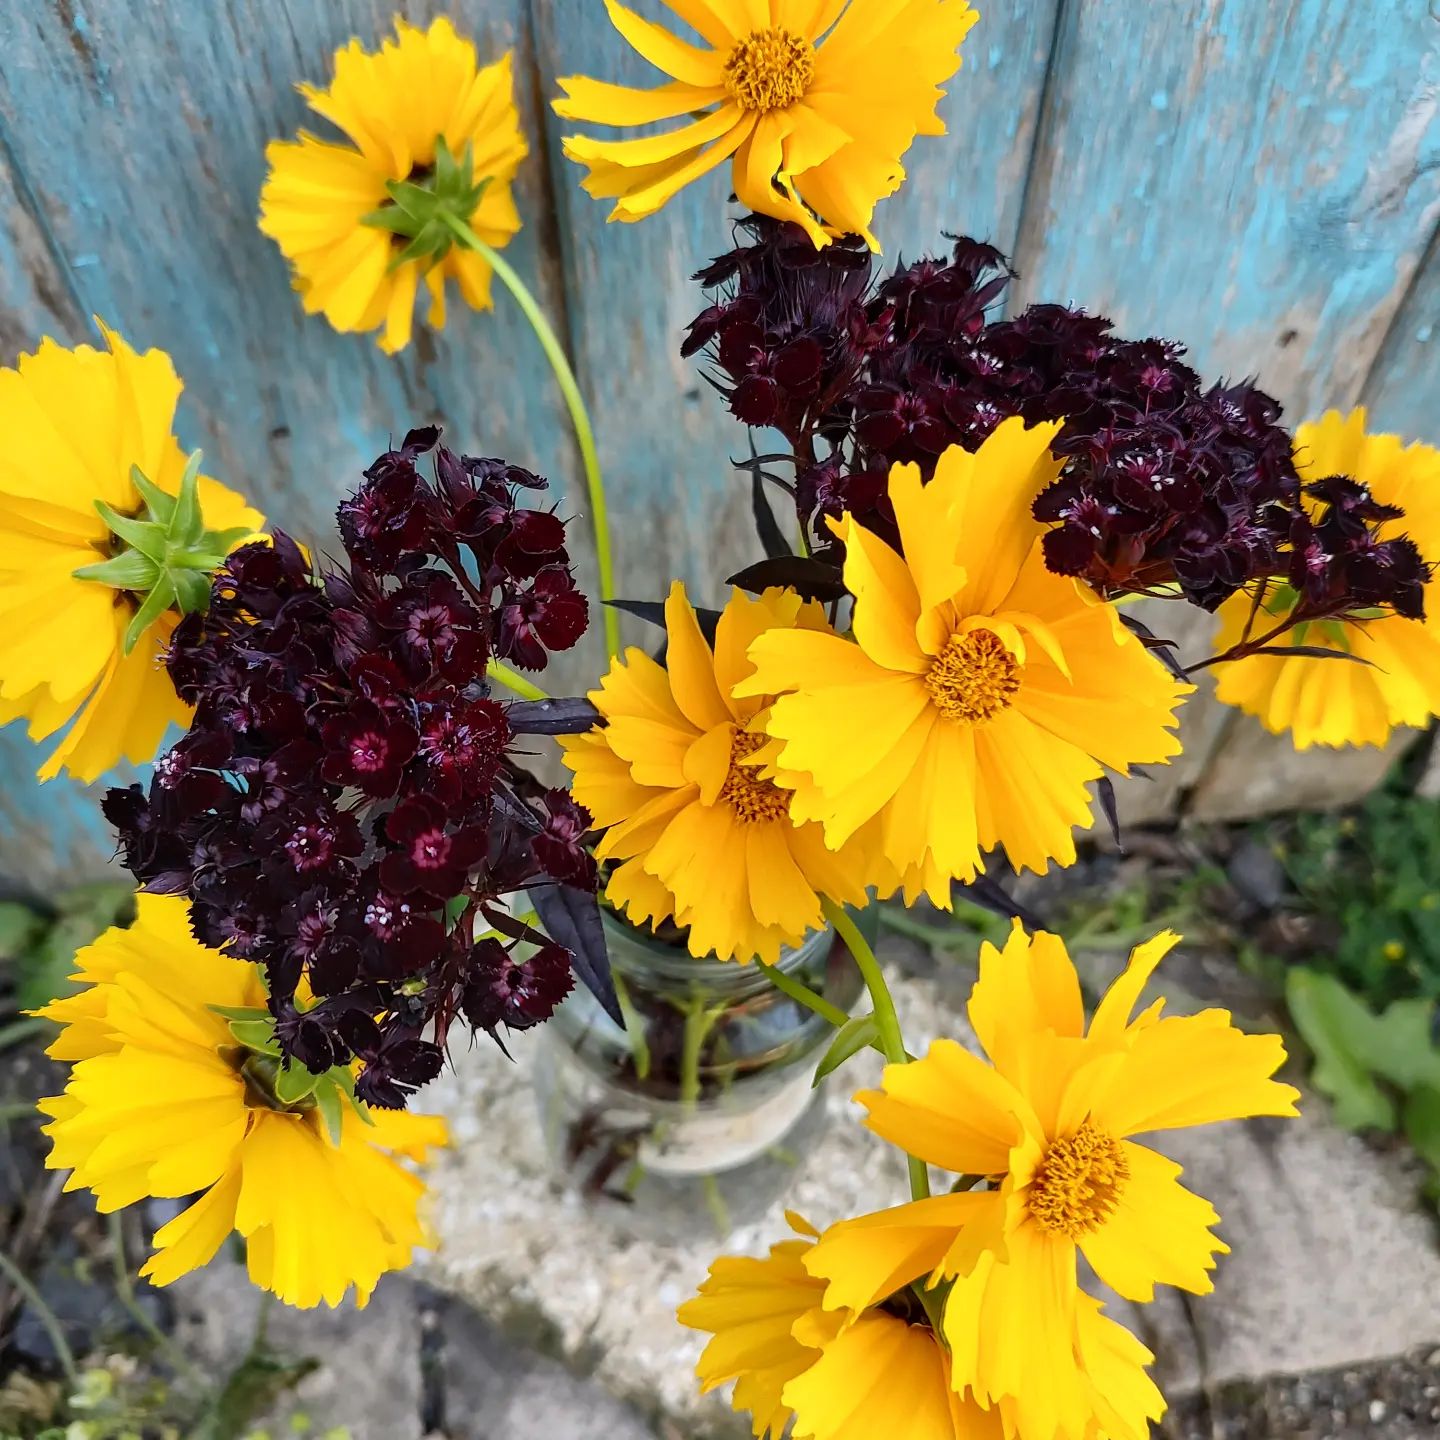 How To Propagate Coreopsis